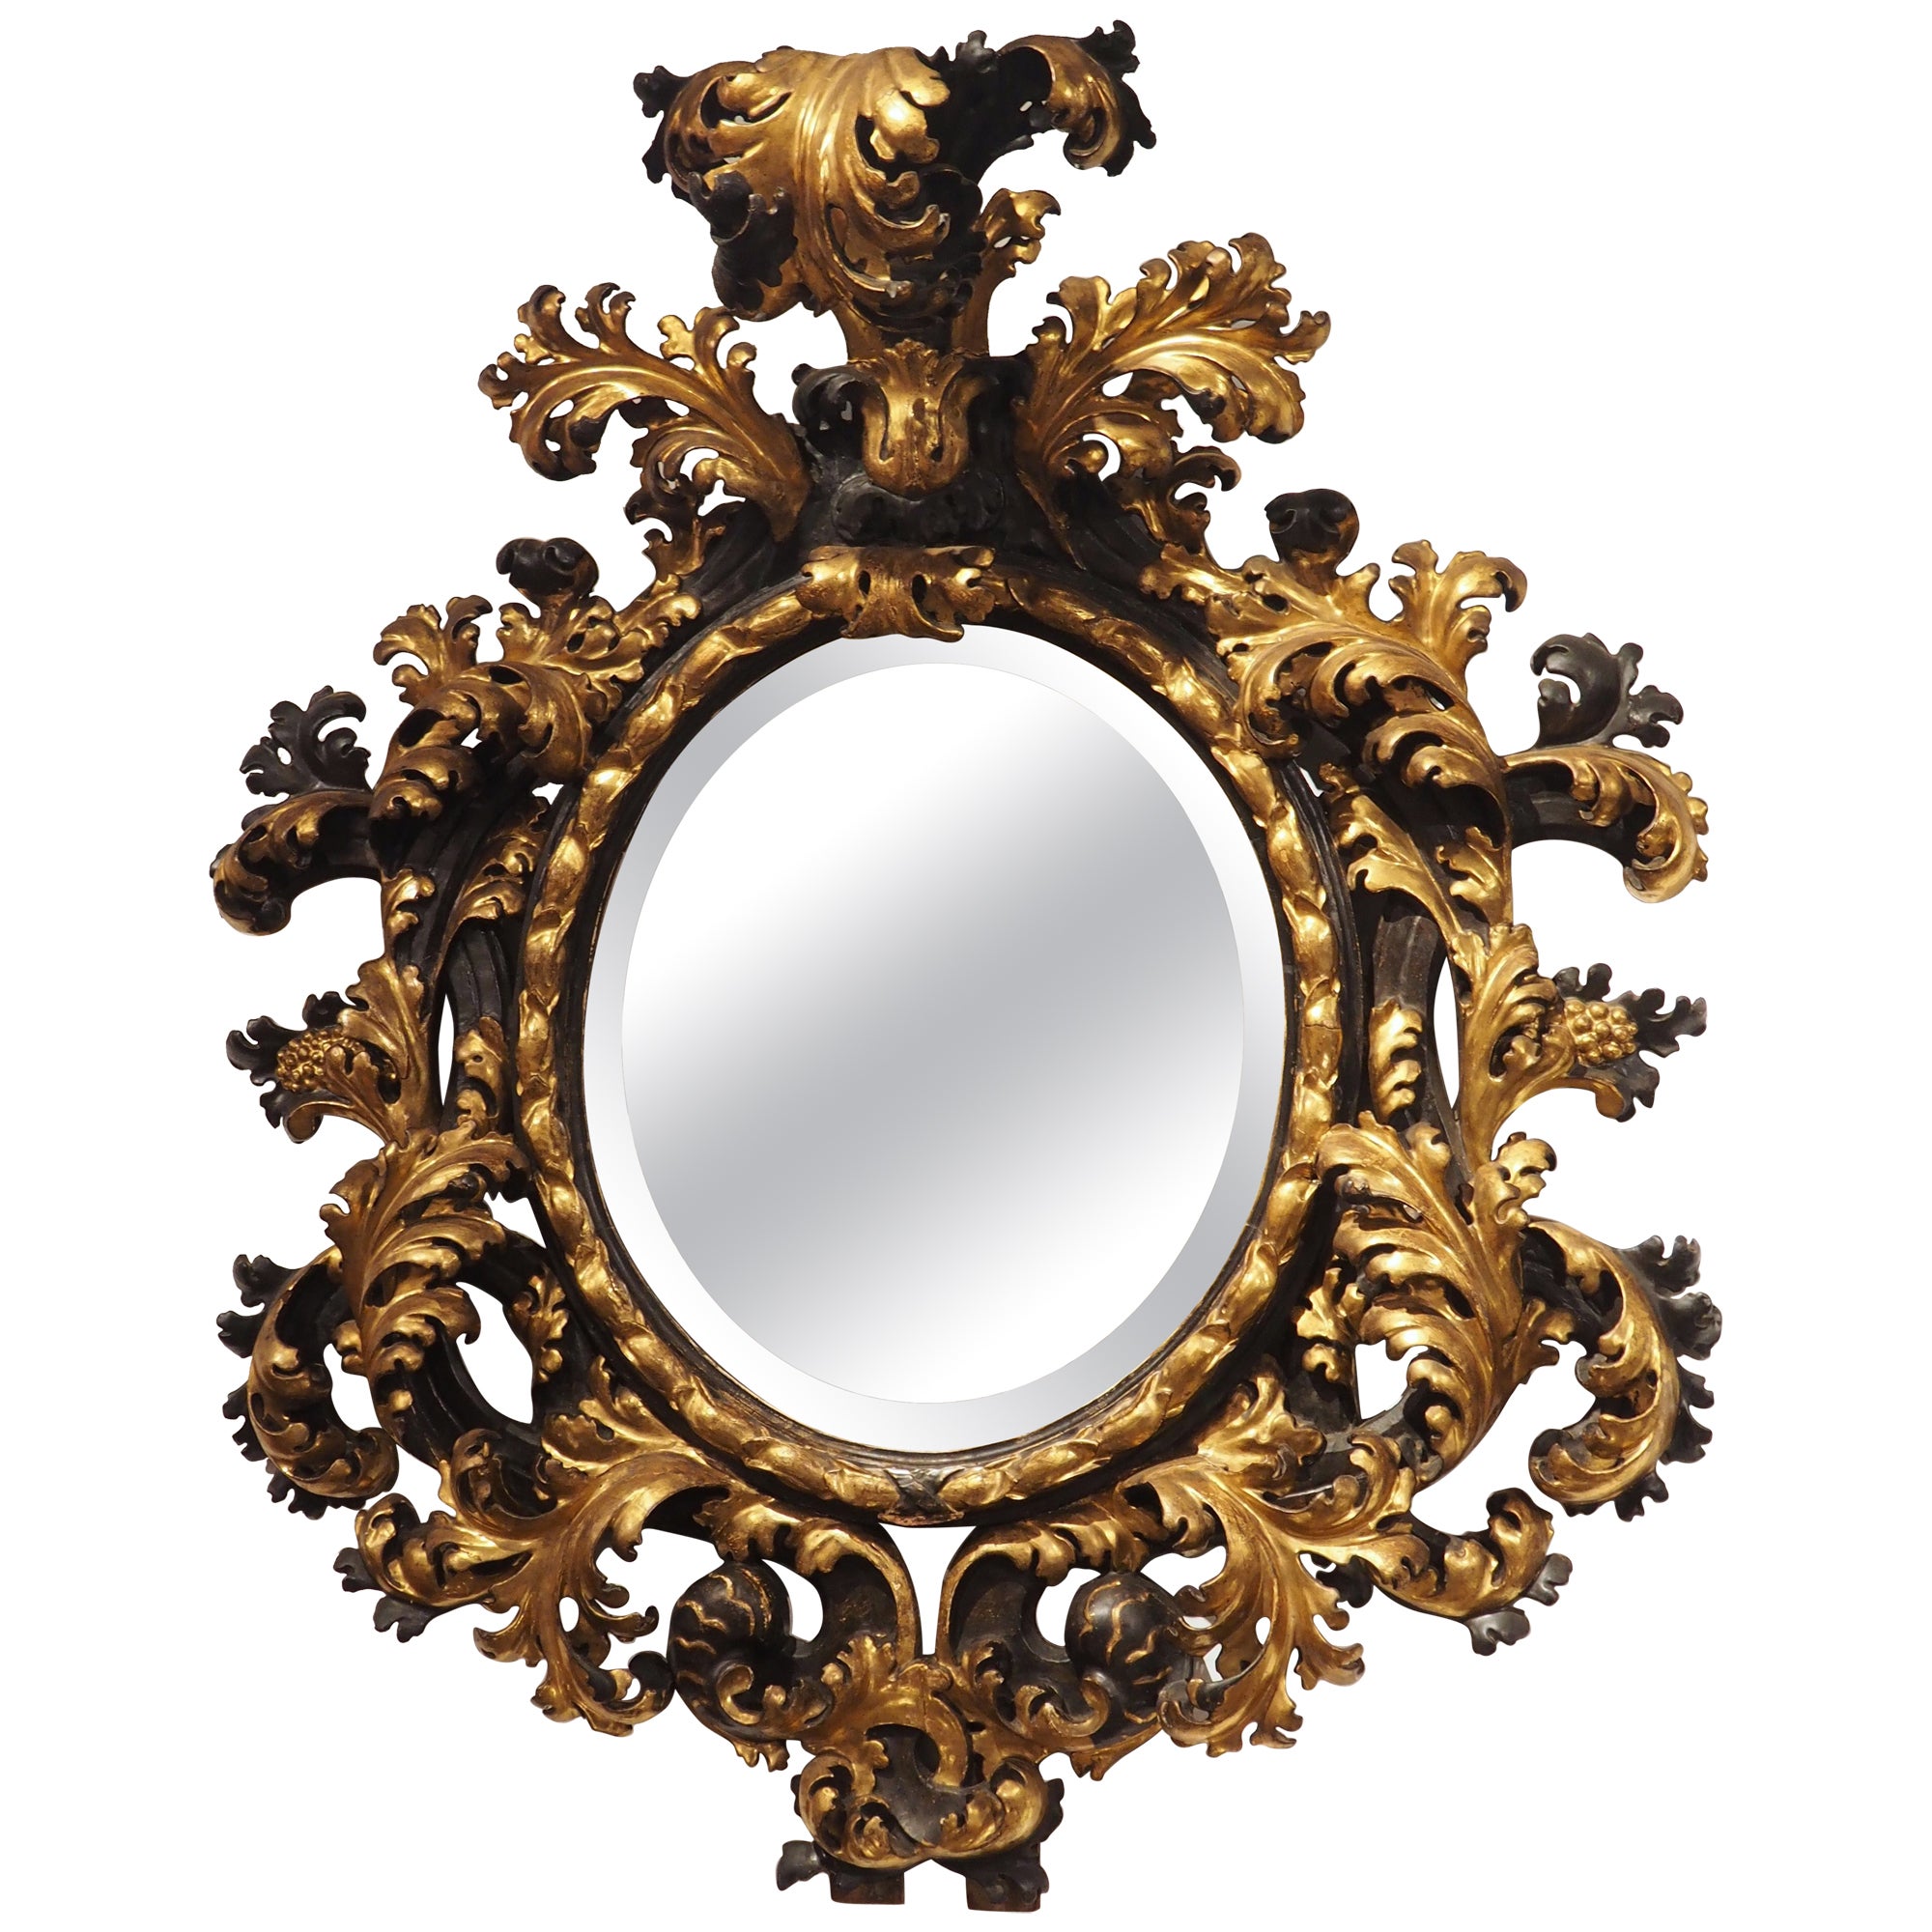 Fabulous Antique Florentine Black and Gold Wall Mirror, Circa 1850 For Sale